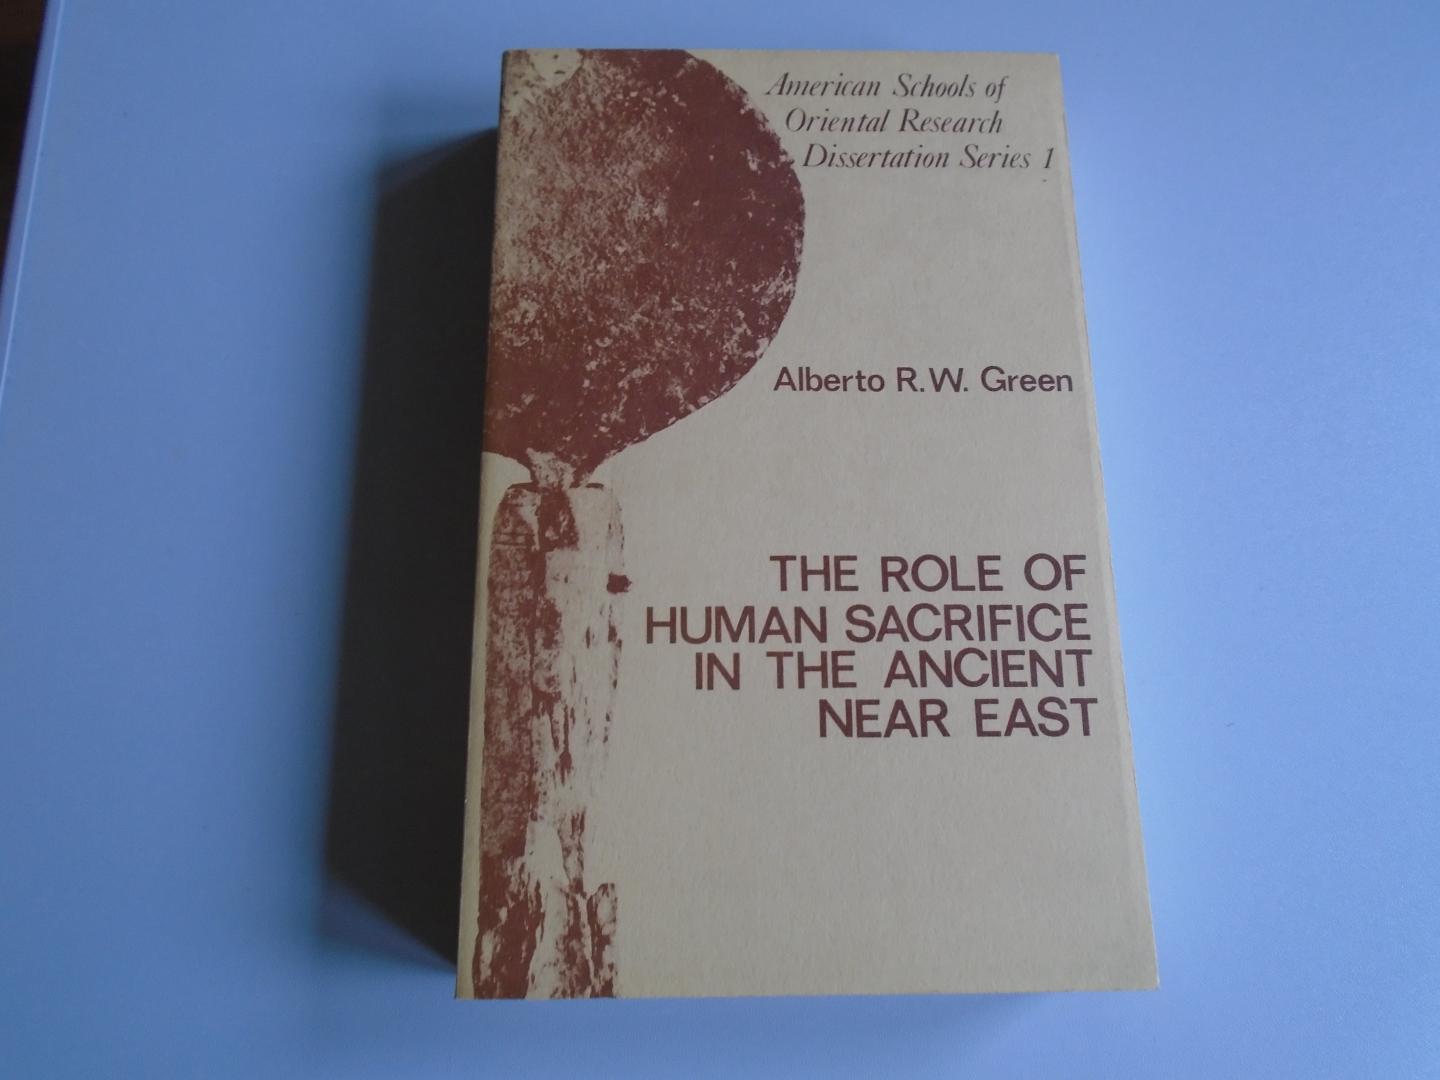 Green, Alberto R.W. - The Role of the Human Sacrifice in the Ancient Near East